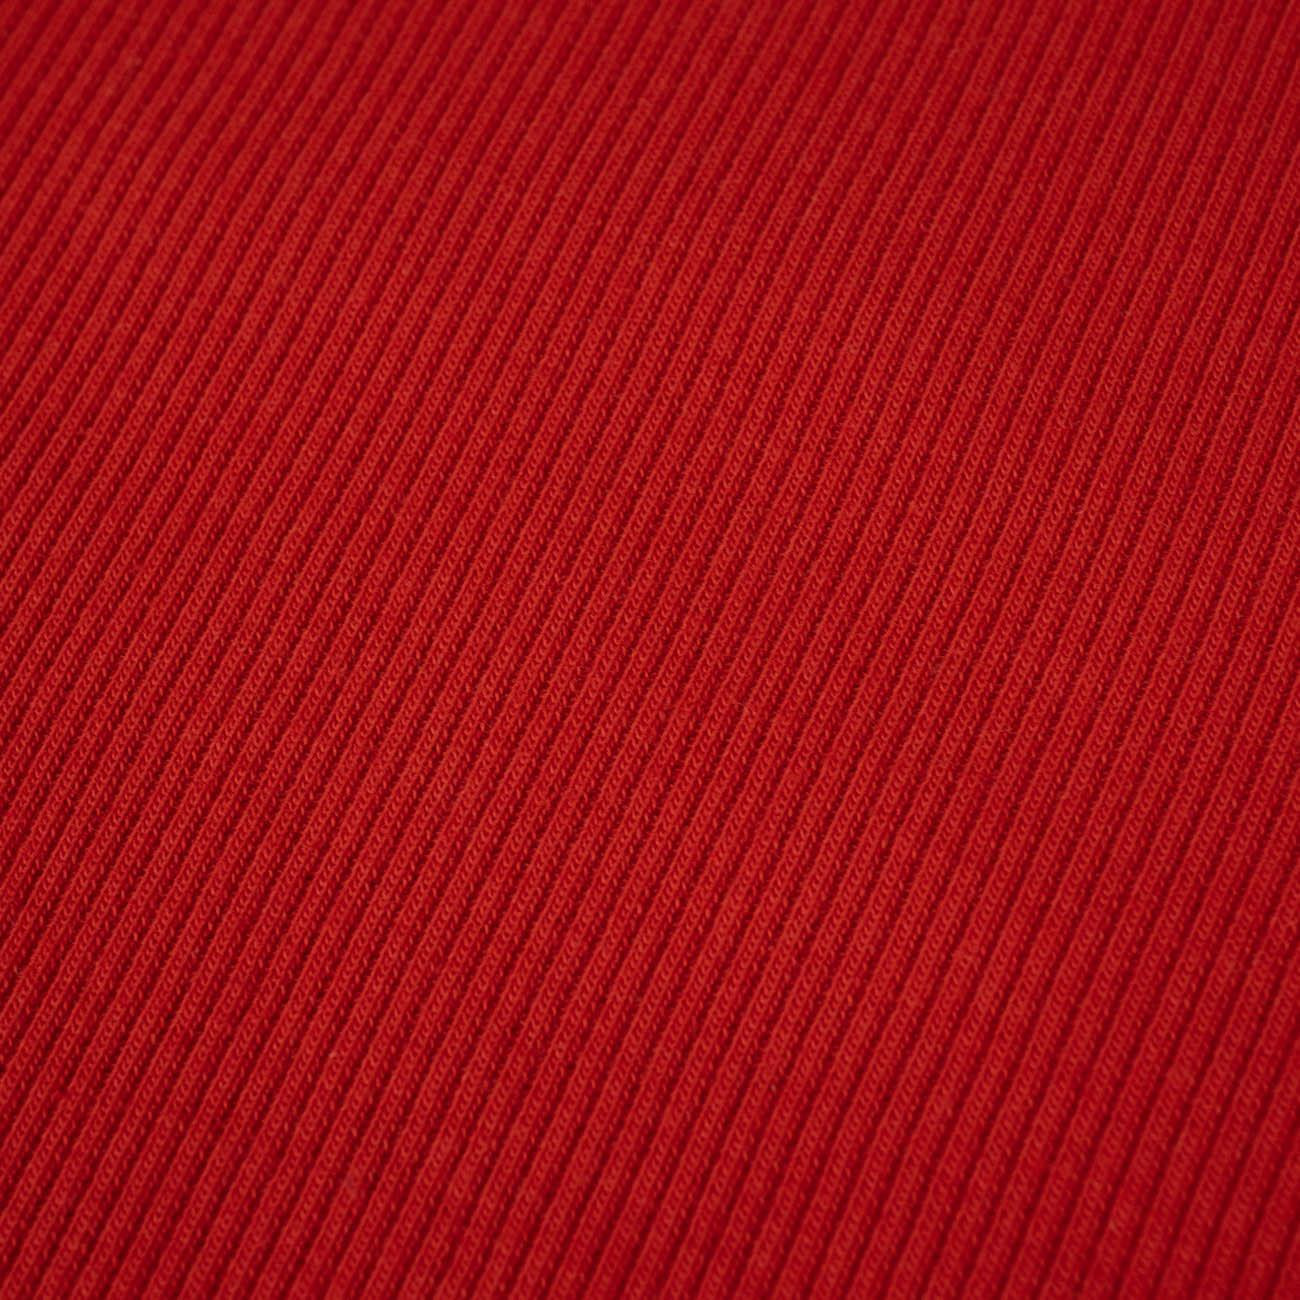 D-18 RED - Ribbed knit fabric